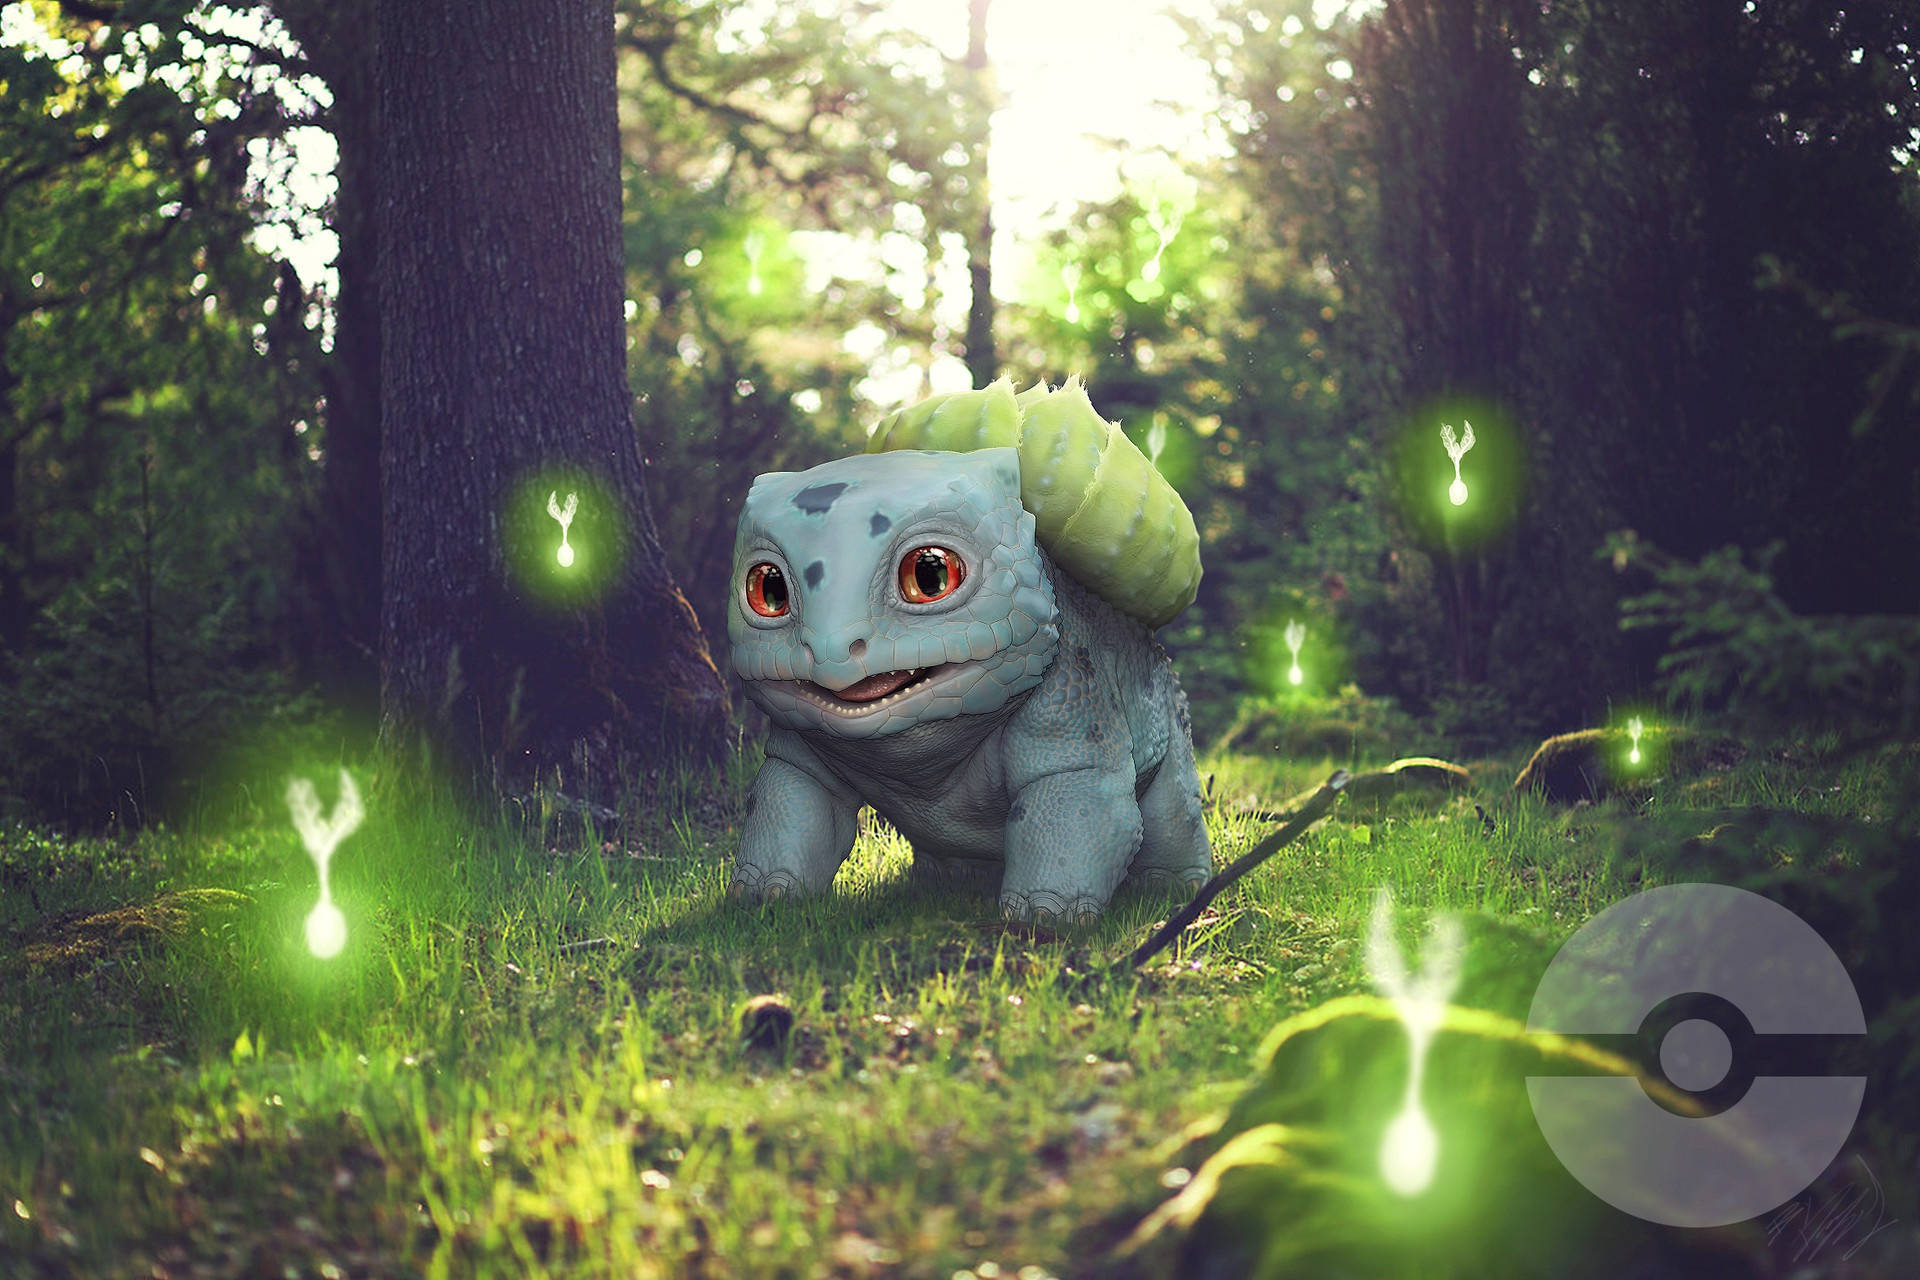 Bulbasaur Walking In The Forest